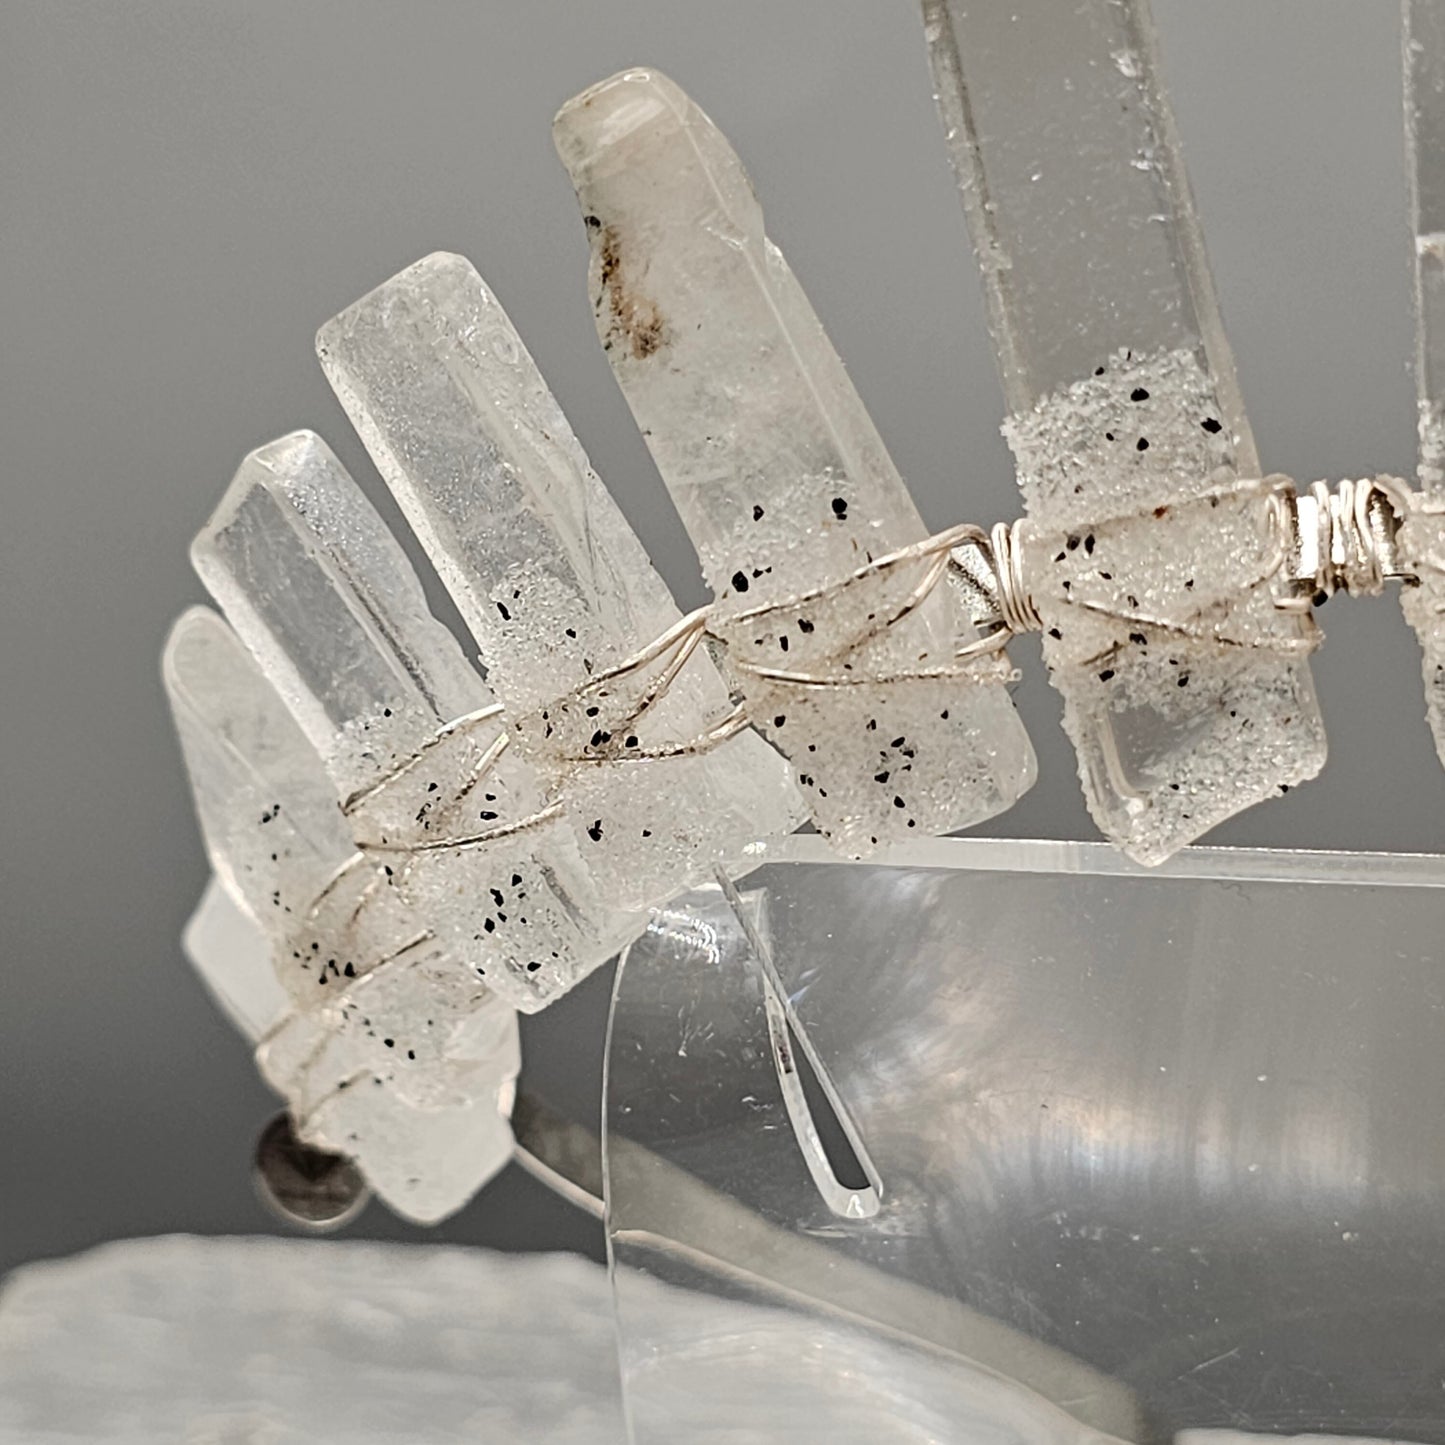 Clear Quartz Crystal Crown with Crushed Moonstone for Amplification and Balance